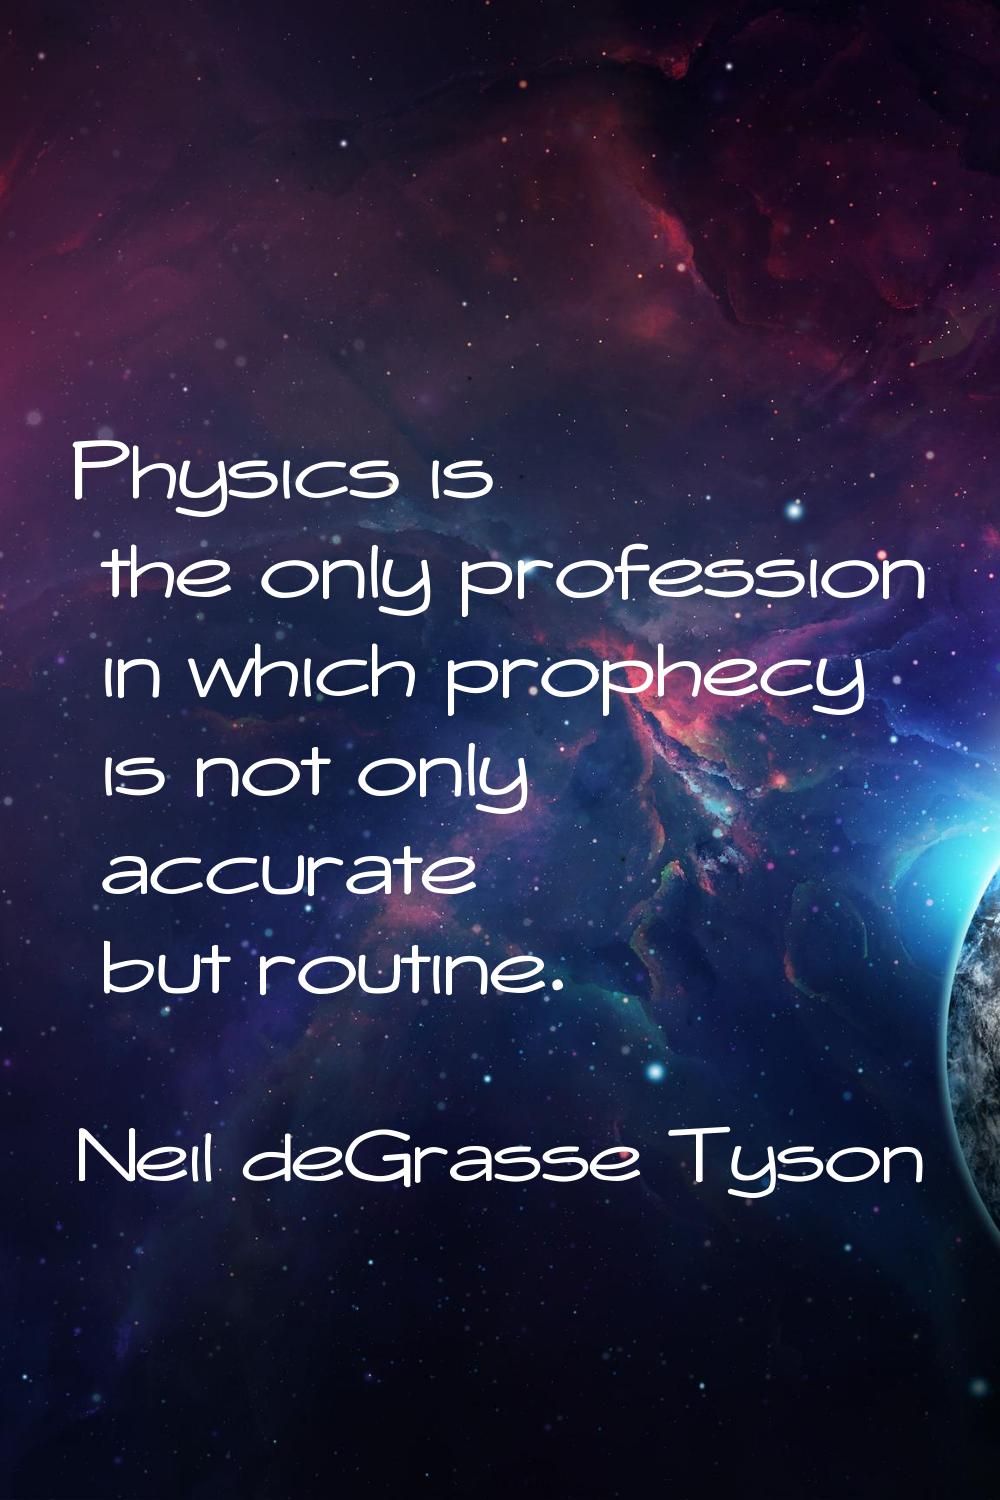 Physics is the only profession in which prophecy is not only accurate but routine.